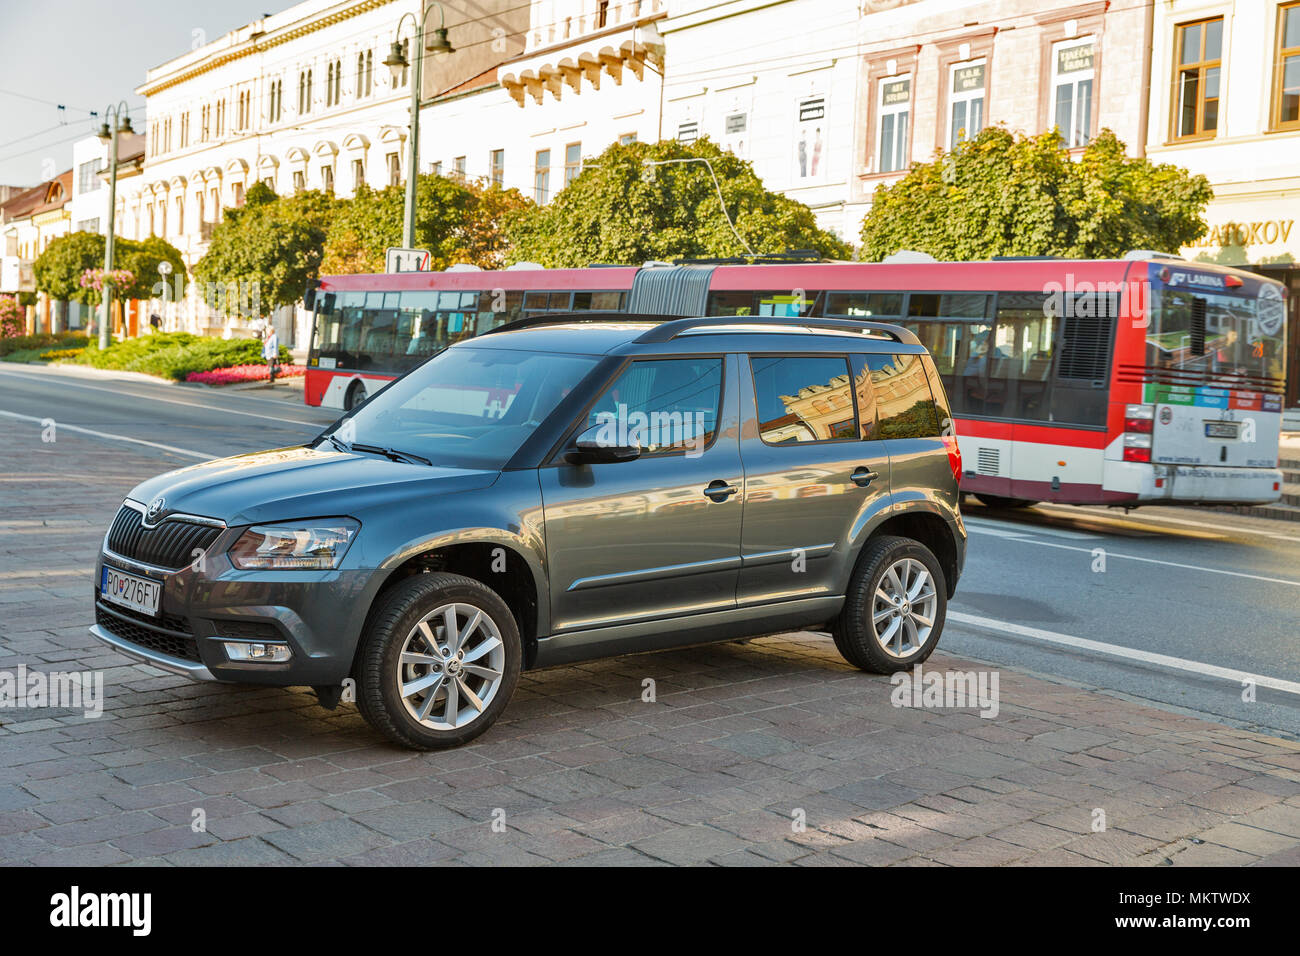 PRESOV, SLOVAKIA - OCTOBER 01, 2017: Hlavna street with parked new Skopda Yeti car in Old Town. It is a city in Eastern Slovakia, third largest city i Stock Photo